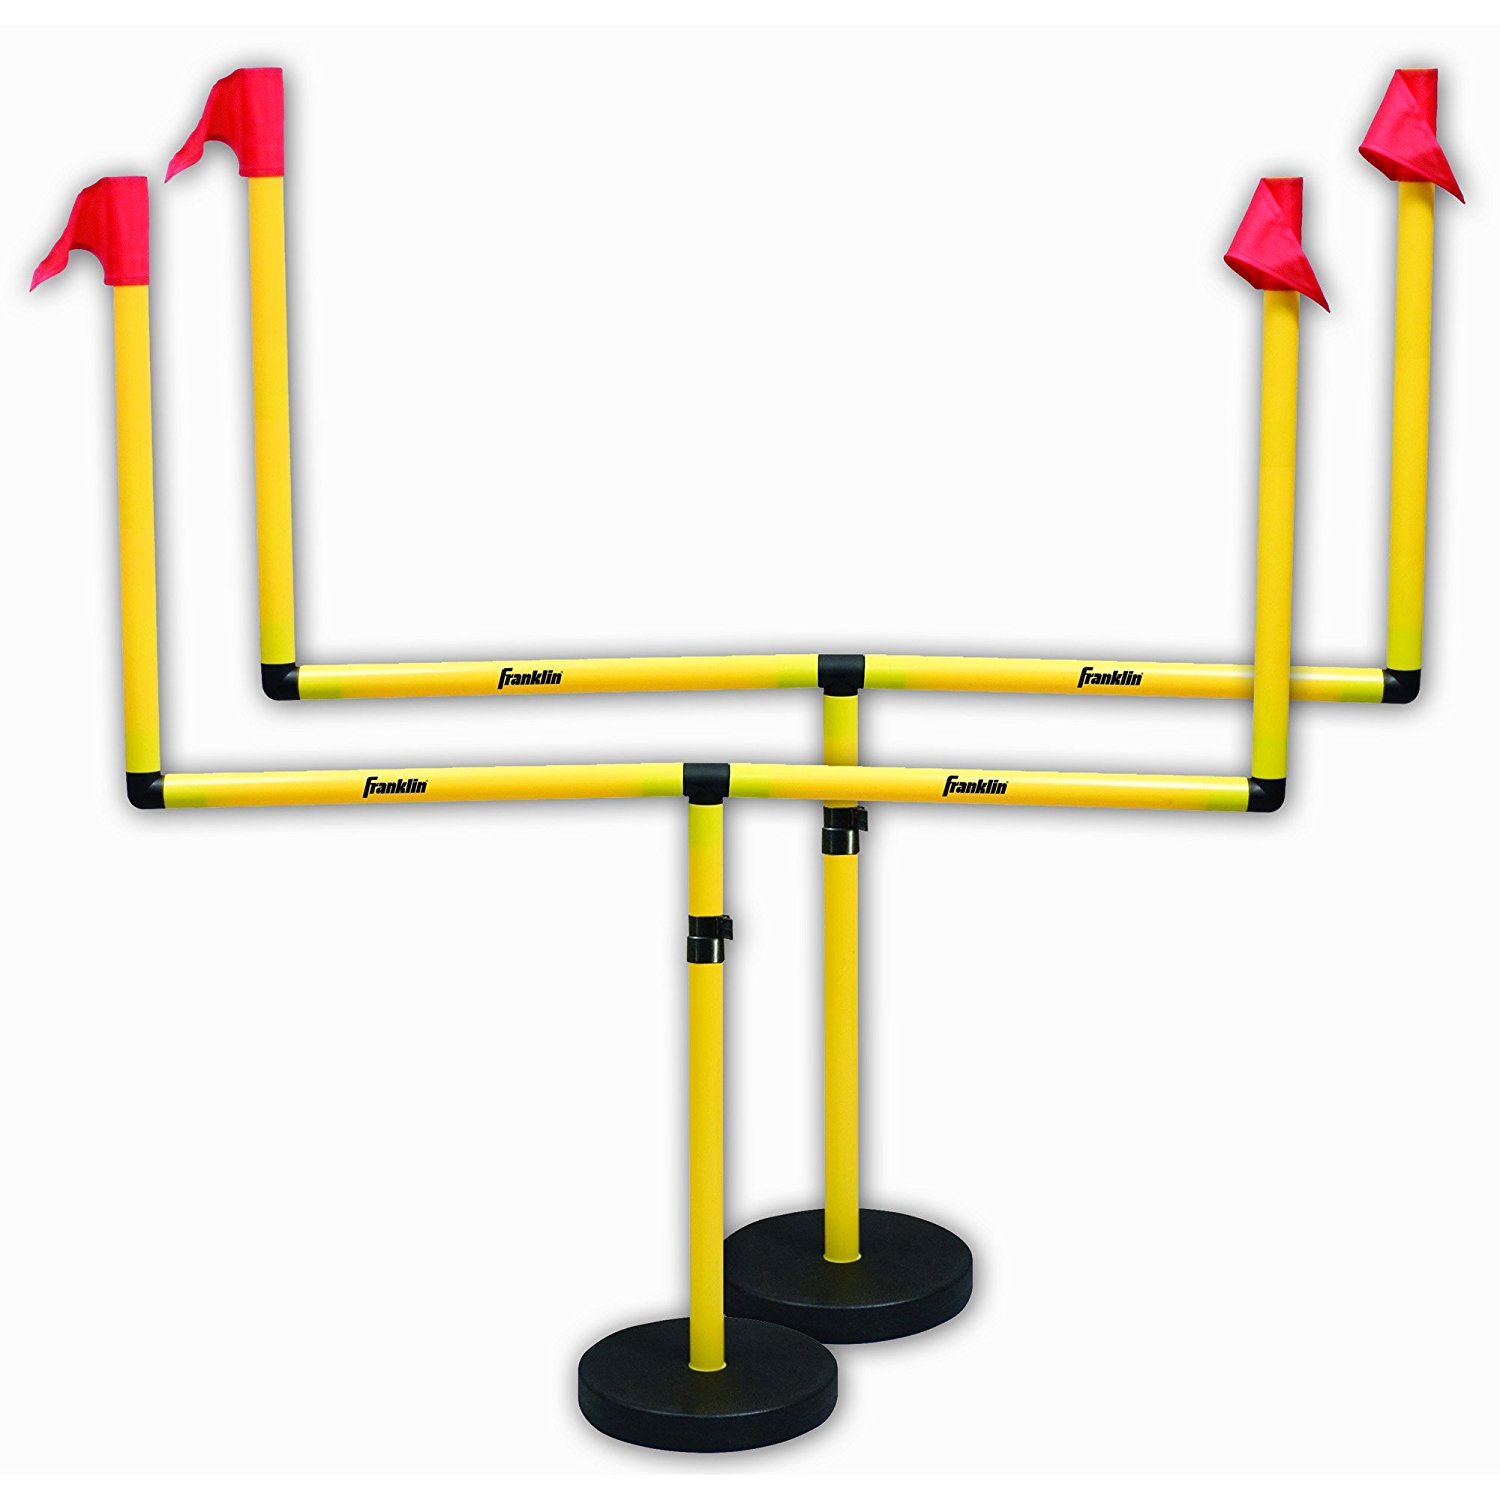 Amazon.com : Franklin Sports Youth Football Adjustable Two Goal Post ...